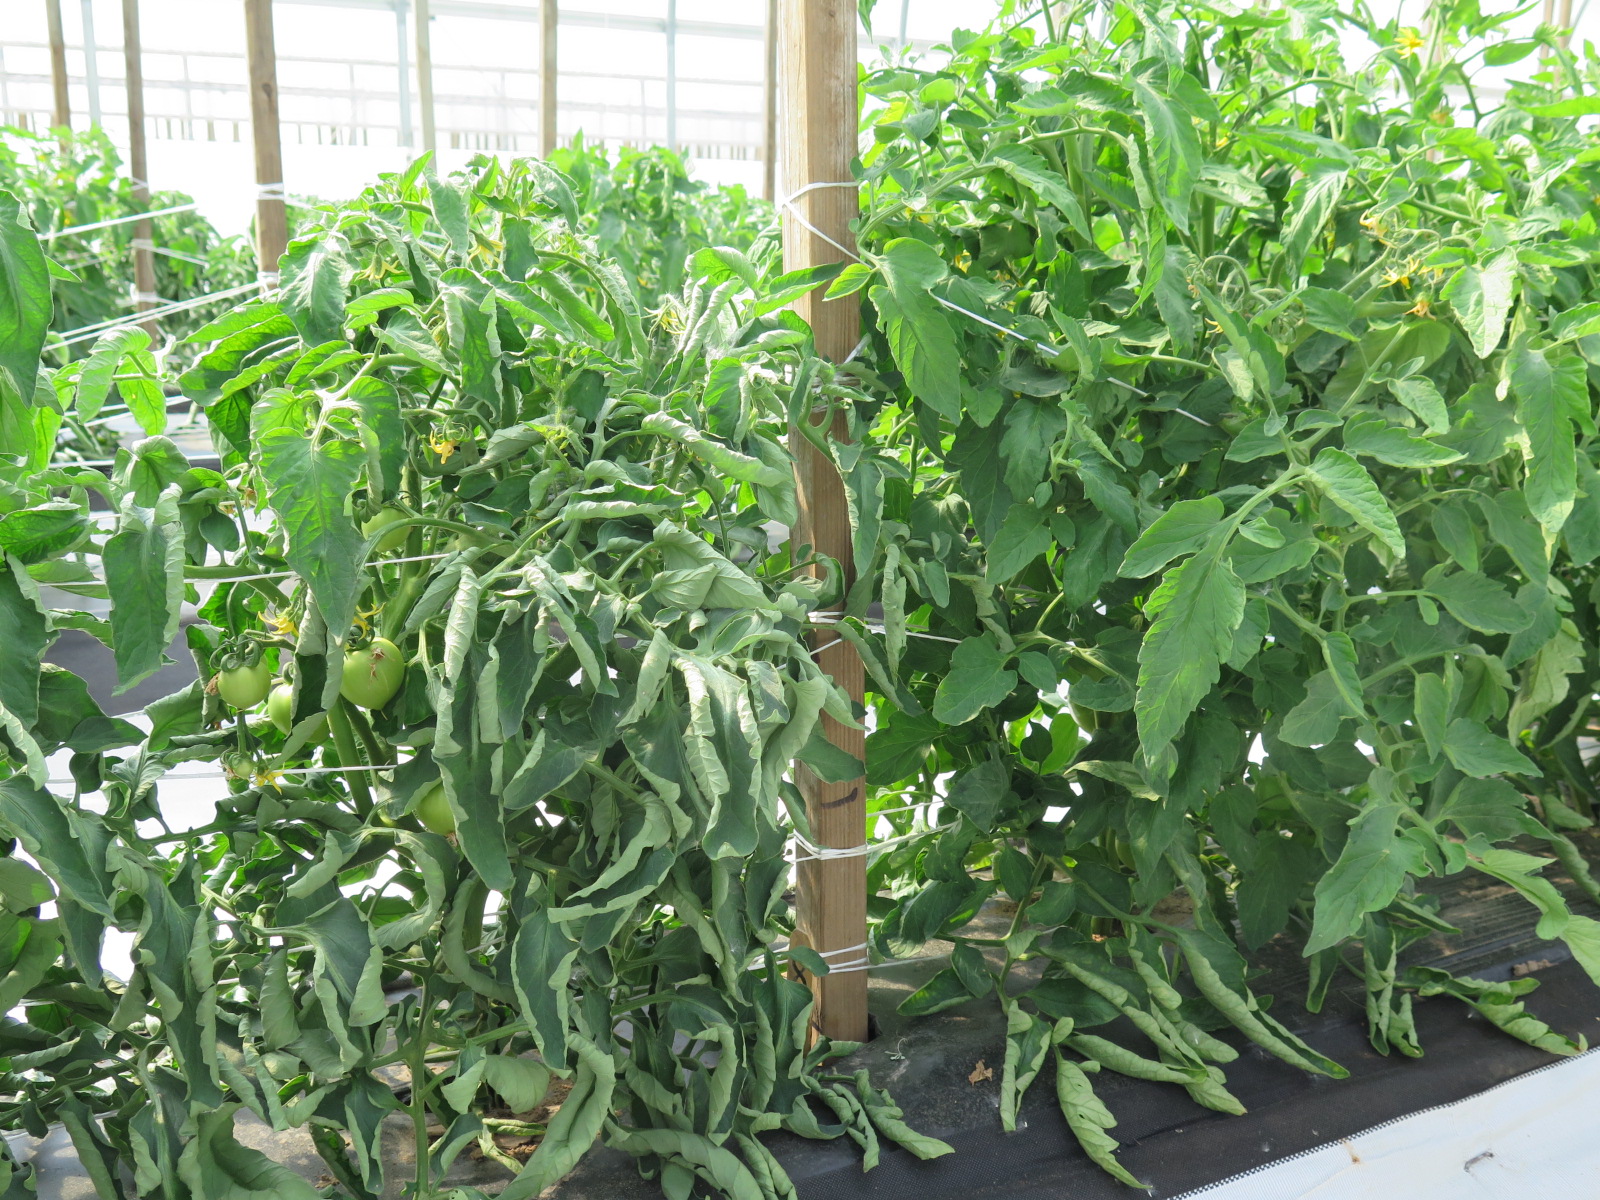 Although leaf roll of tomato leaves can sometimes indicate stress, leaf roll can also be genetic